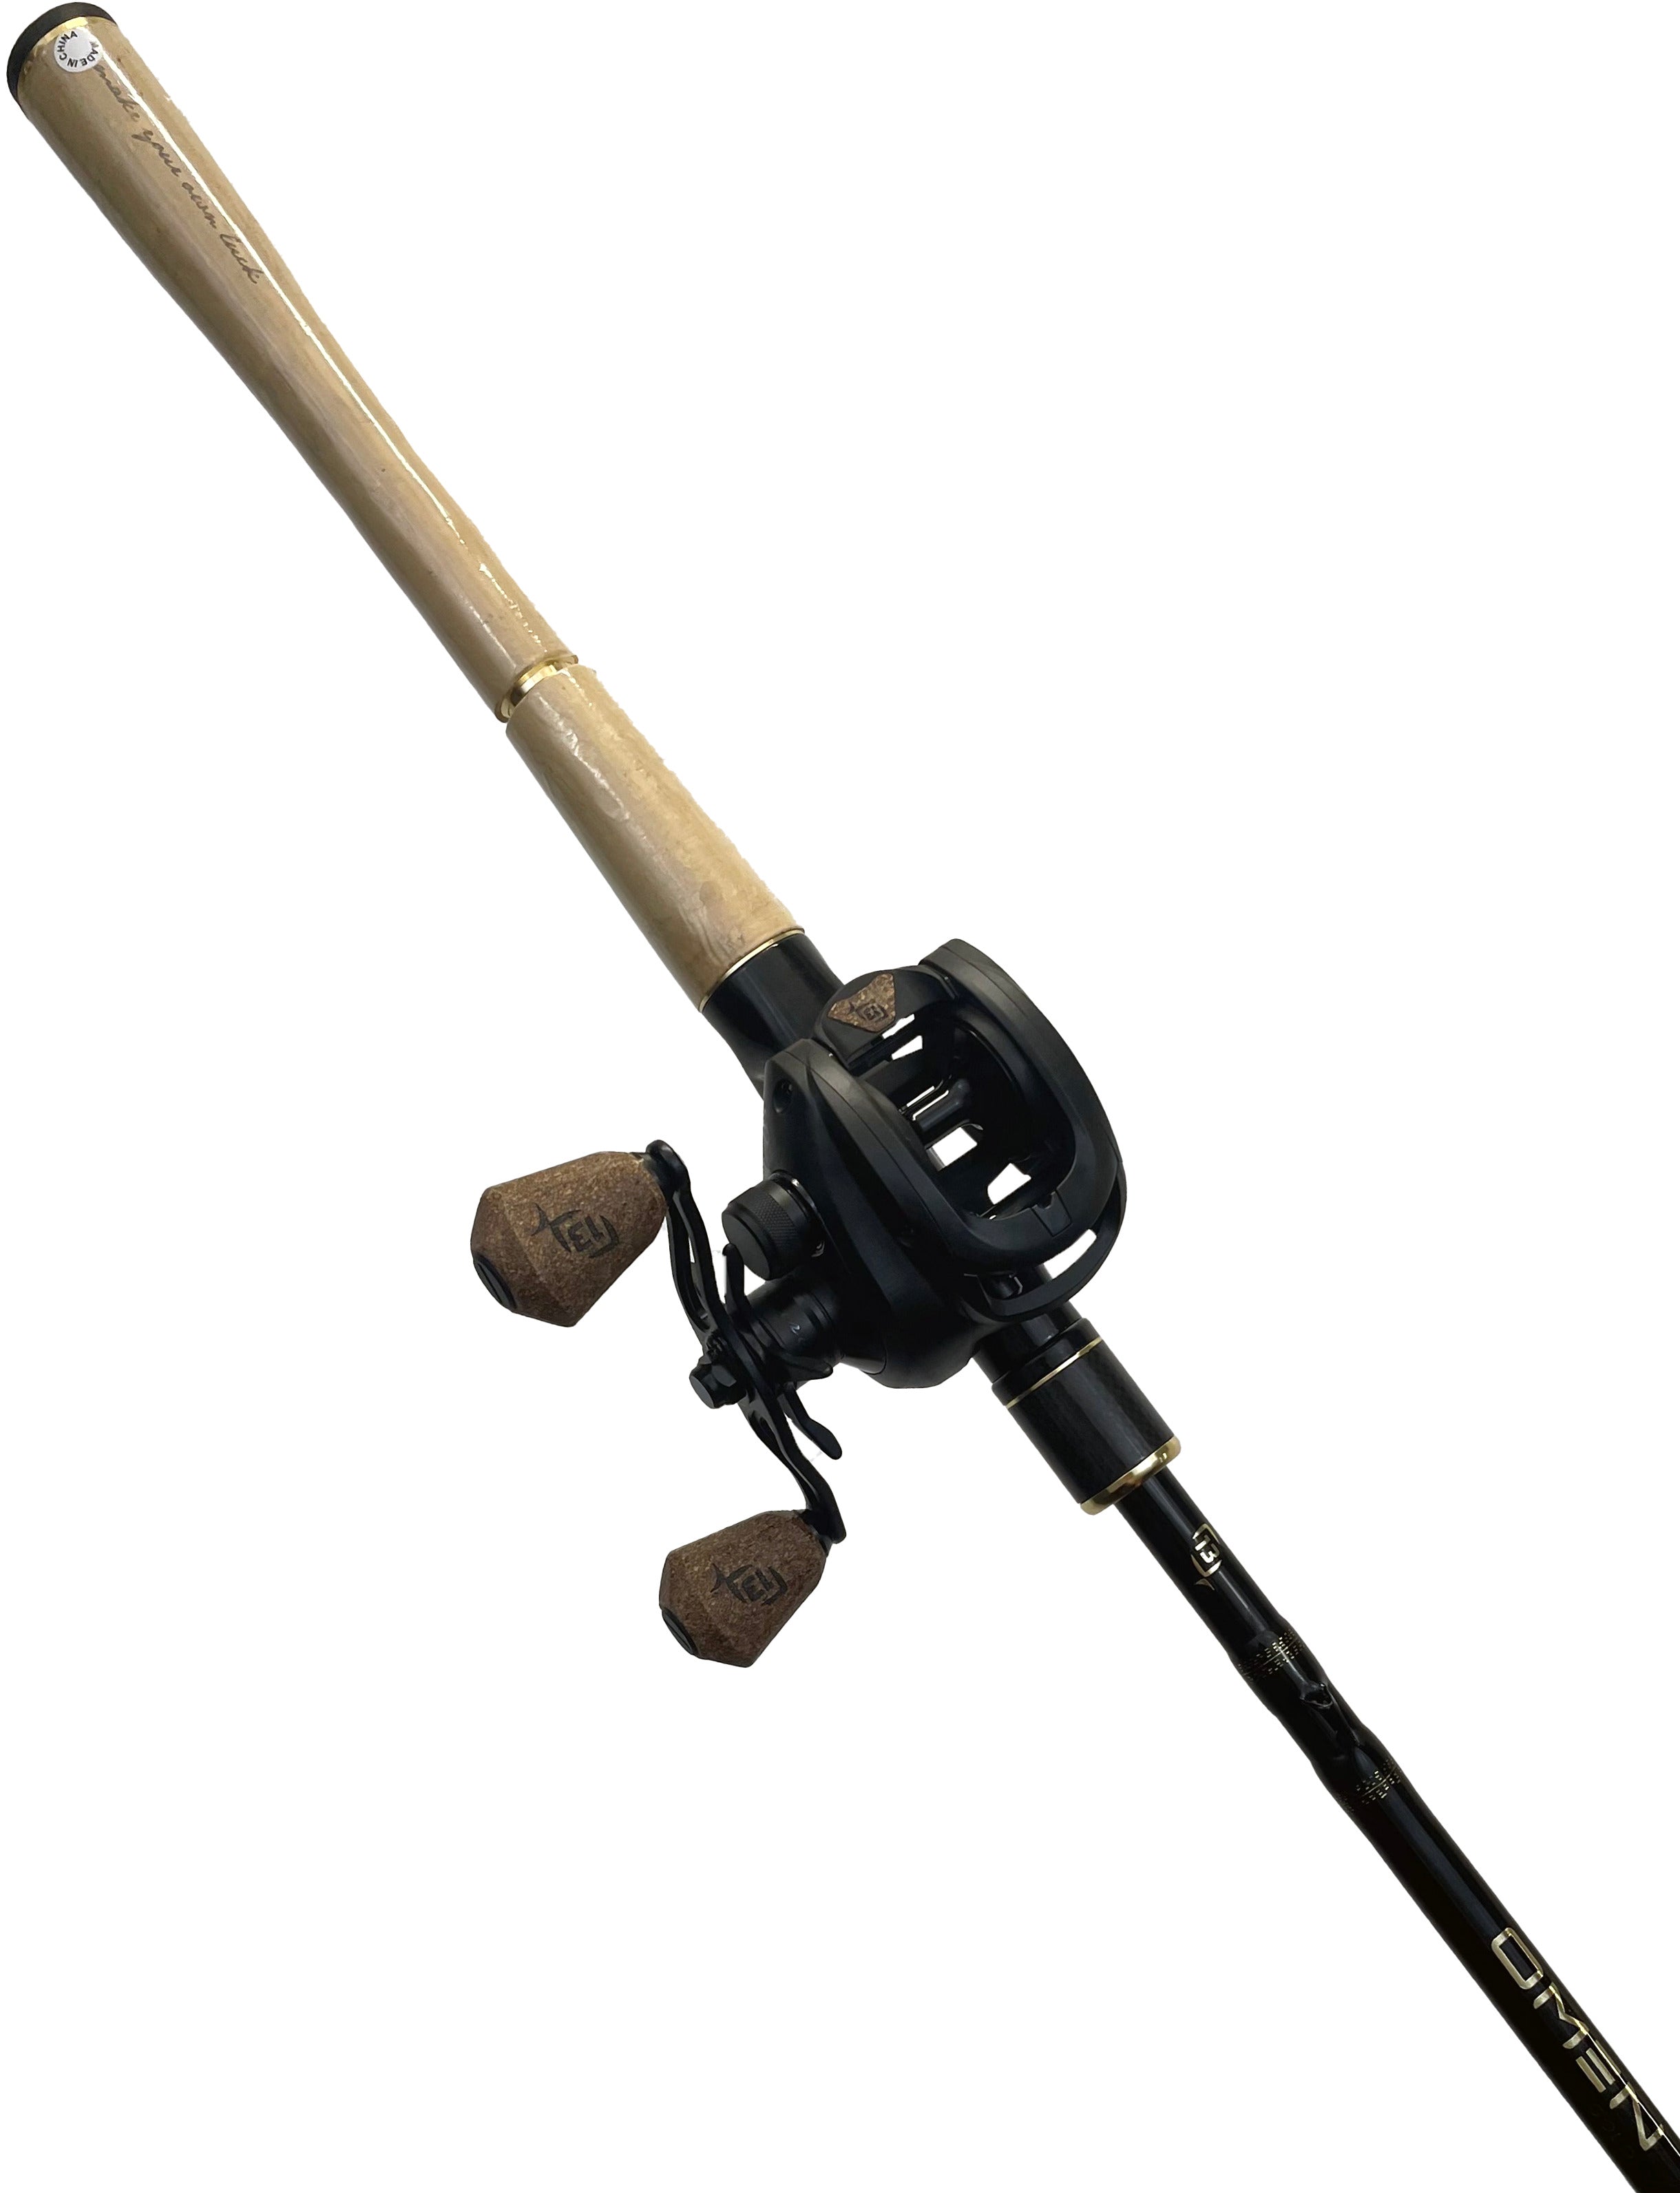 13 Fishing's New Ice Fishing Combos, Rods And Reels - Rapala